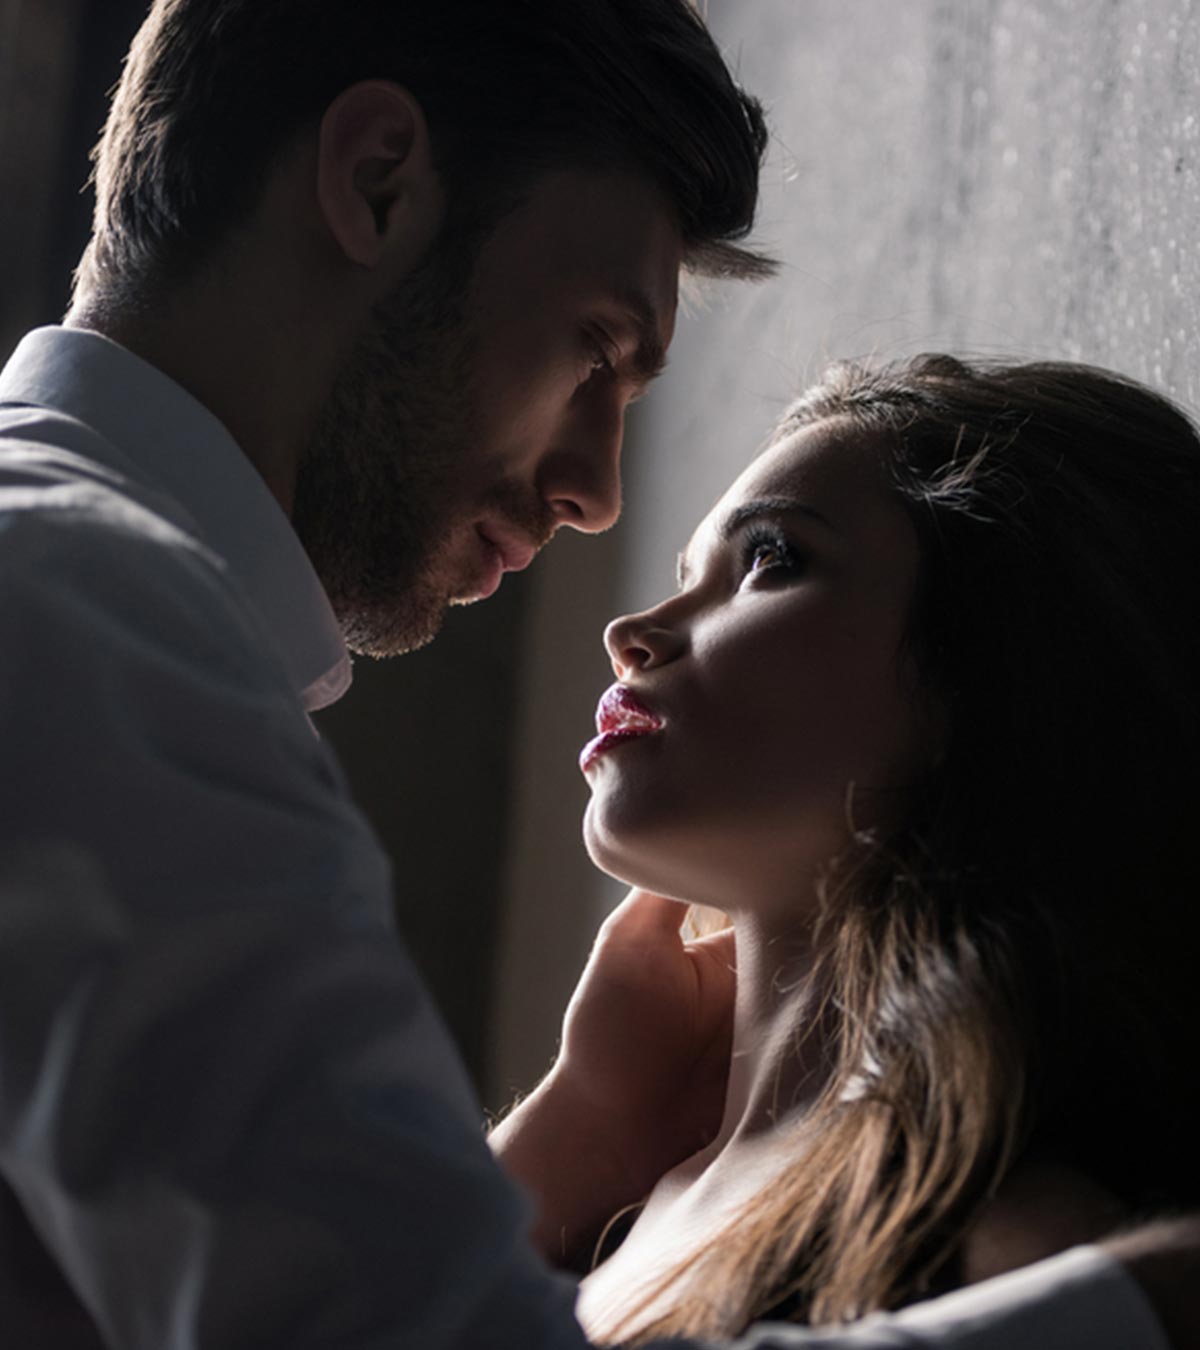 20 Main Differences Between Love and Obsession